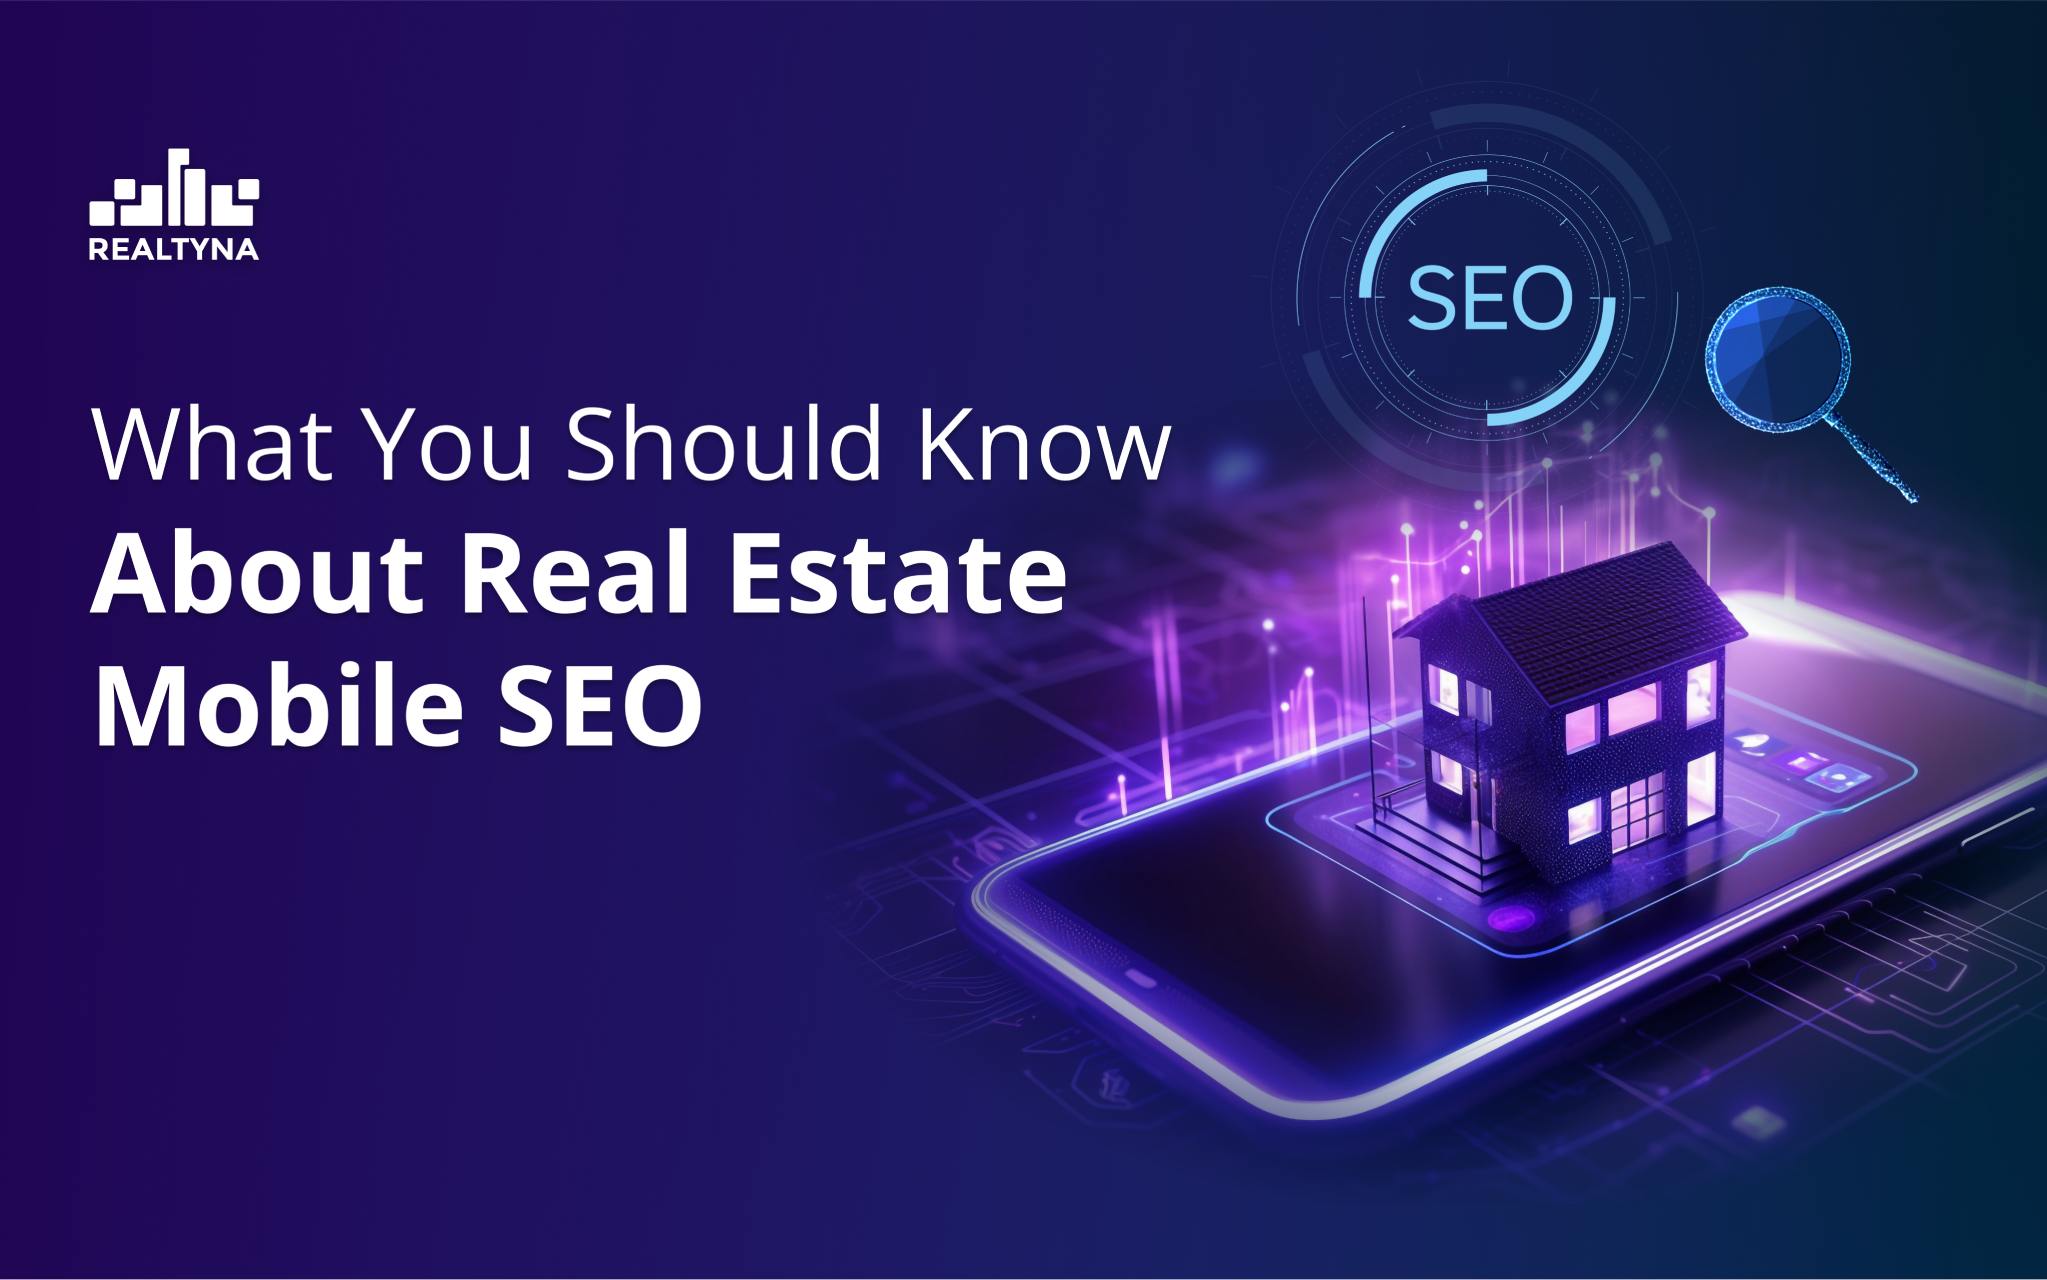 What You Should Know About Real Estate Mobile SEO